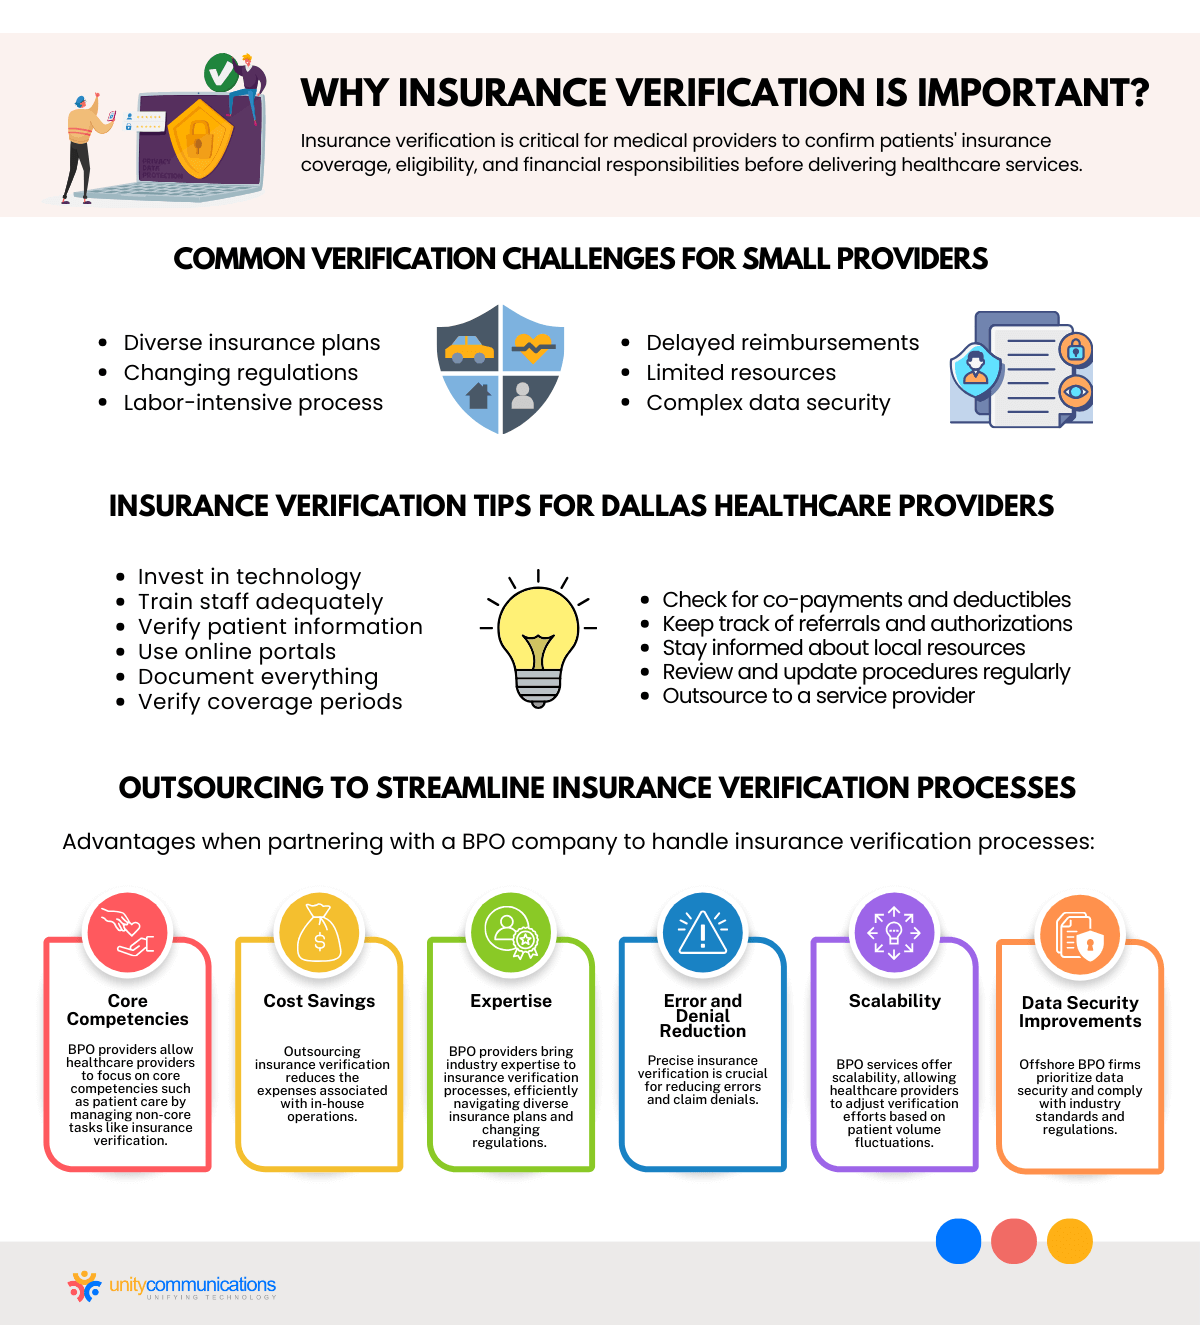 Why insurance verification is important?